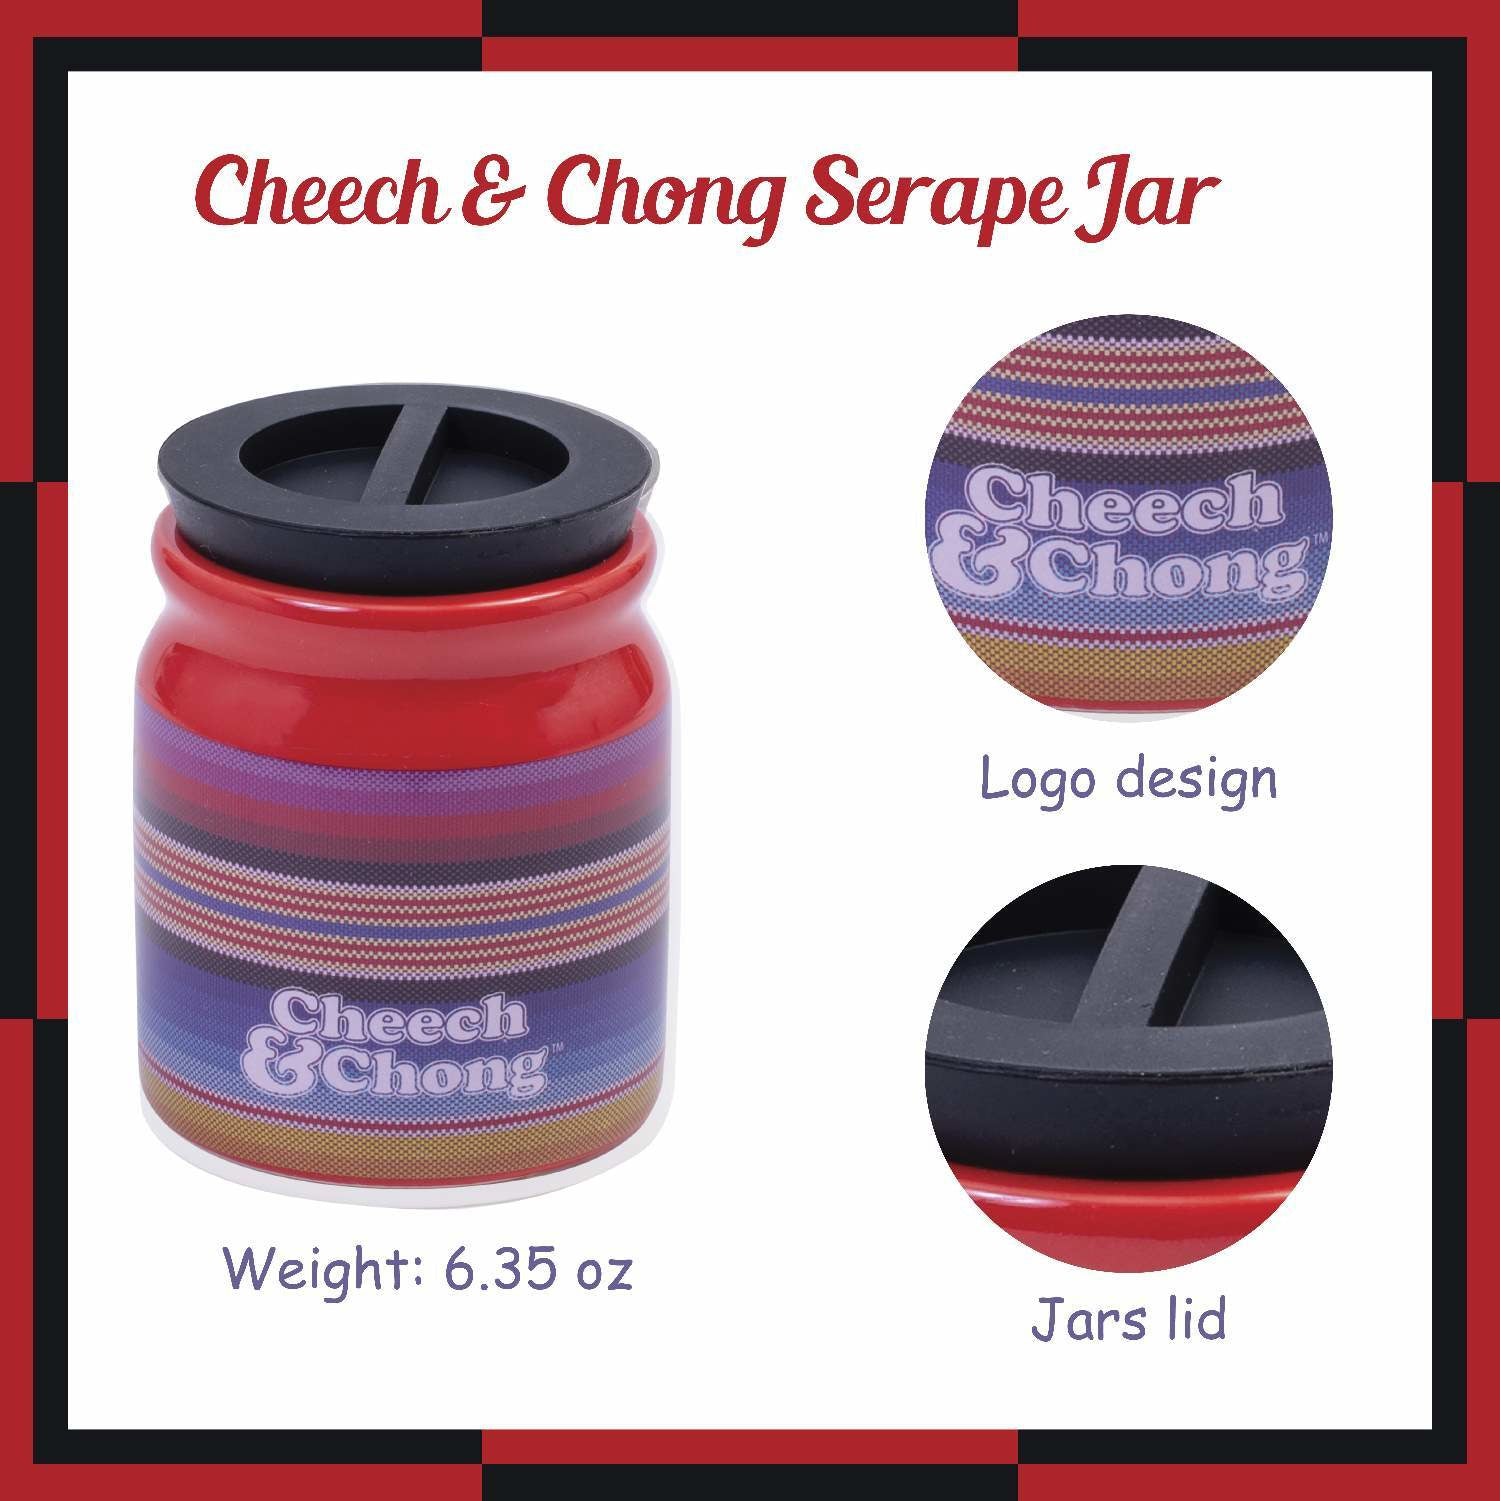 Cheech and Chong Ceramic Storage & Stash Jar for home and outdoor